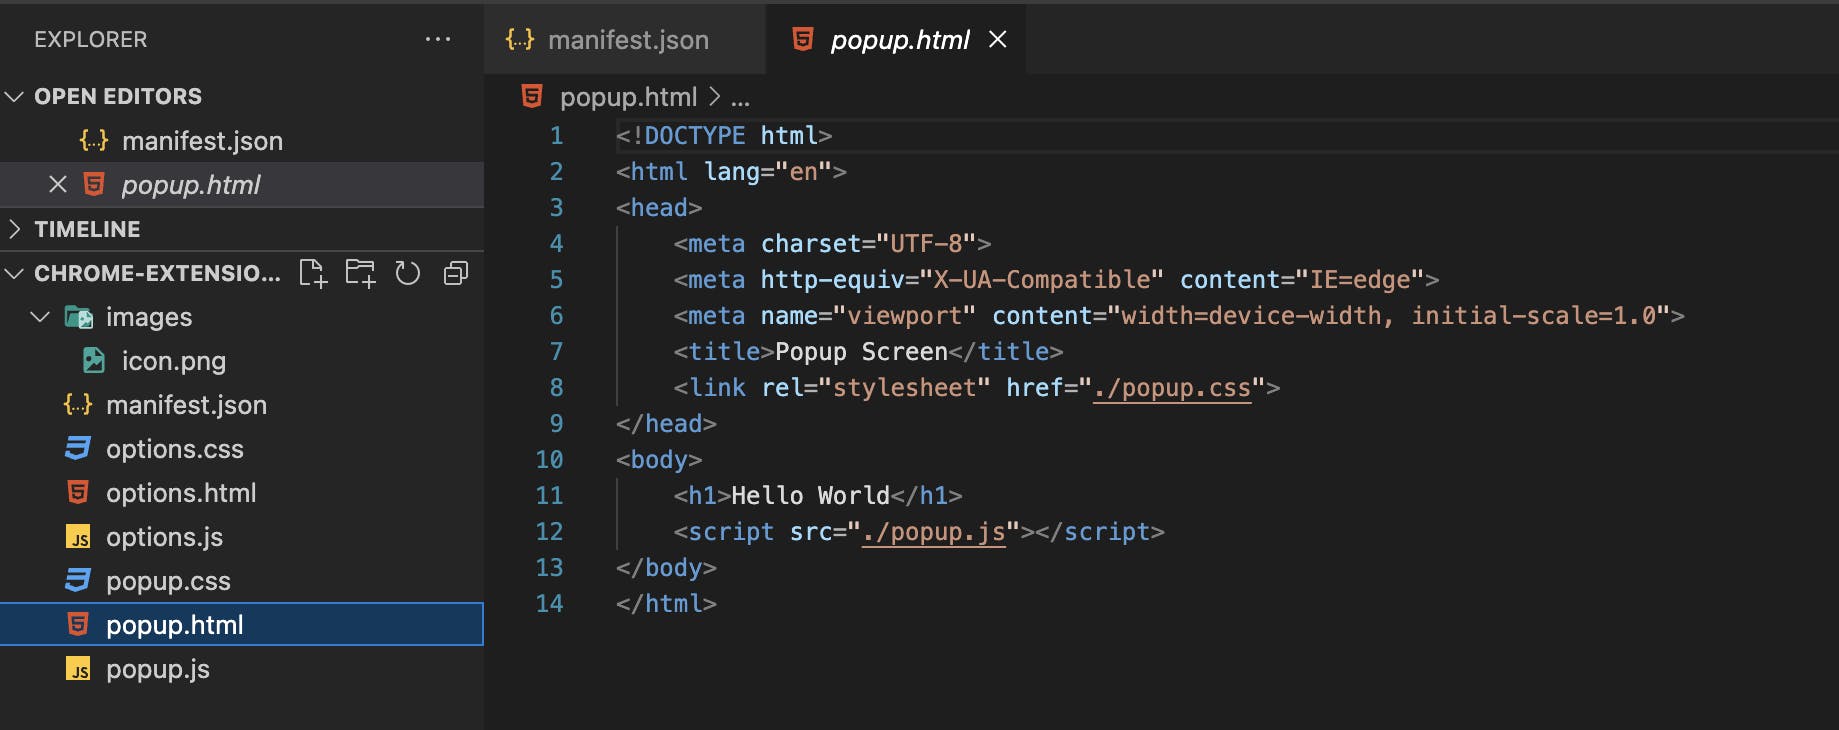 We have created a popup.html page with the heading h1 "Hello World" linked with popup.css and popup.js. 